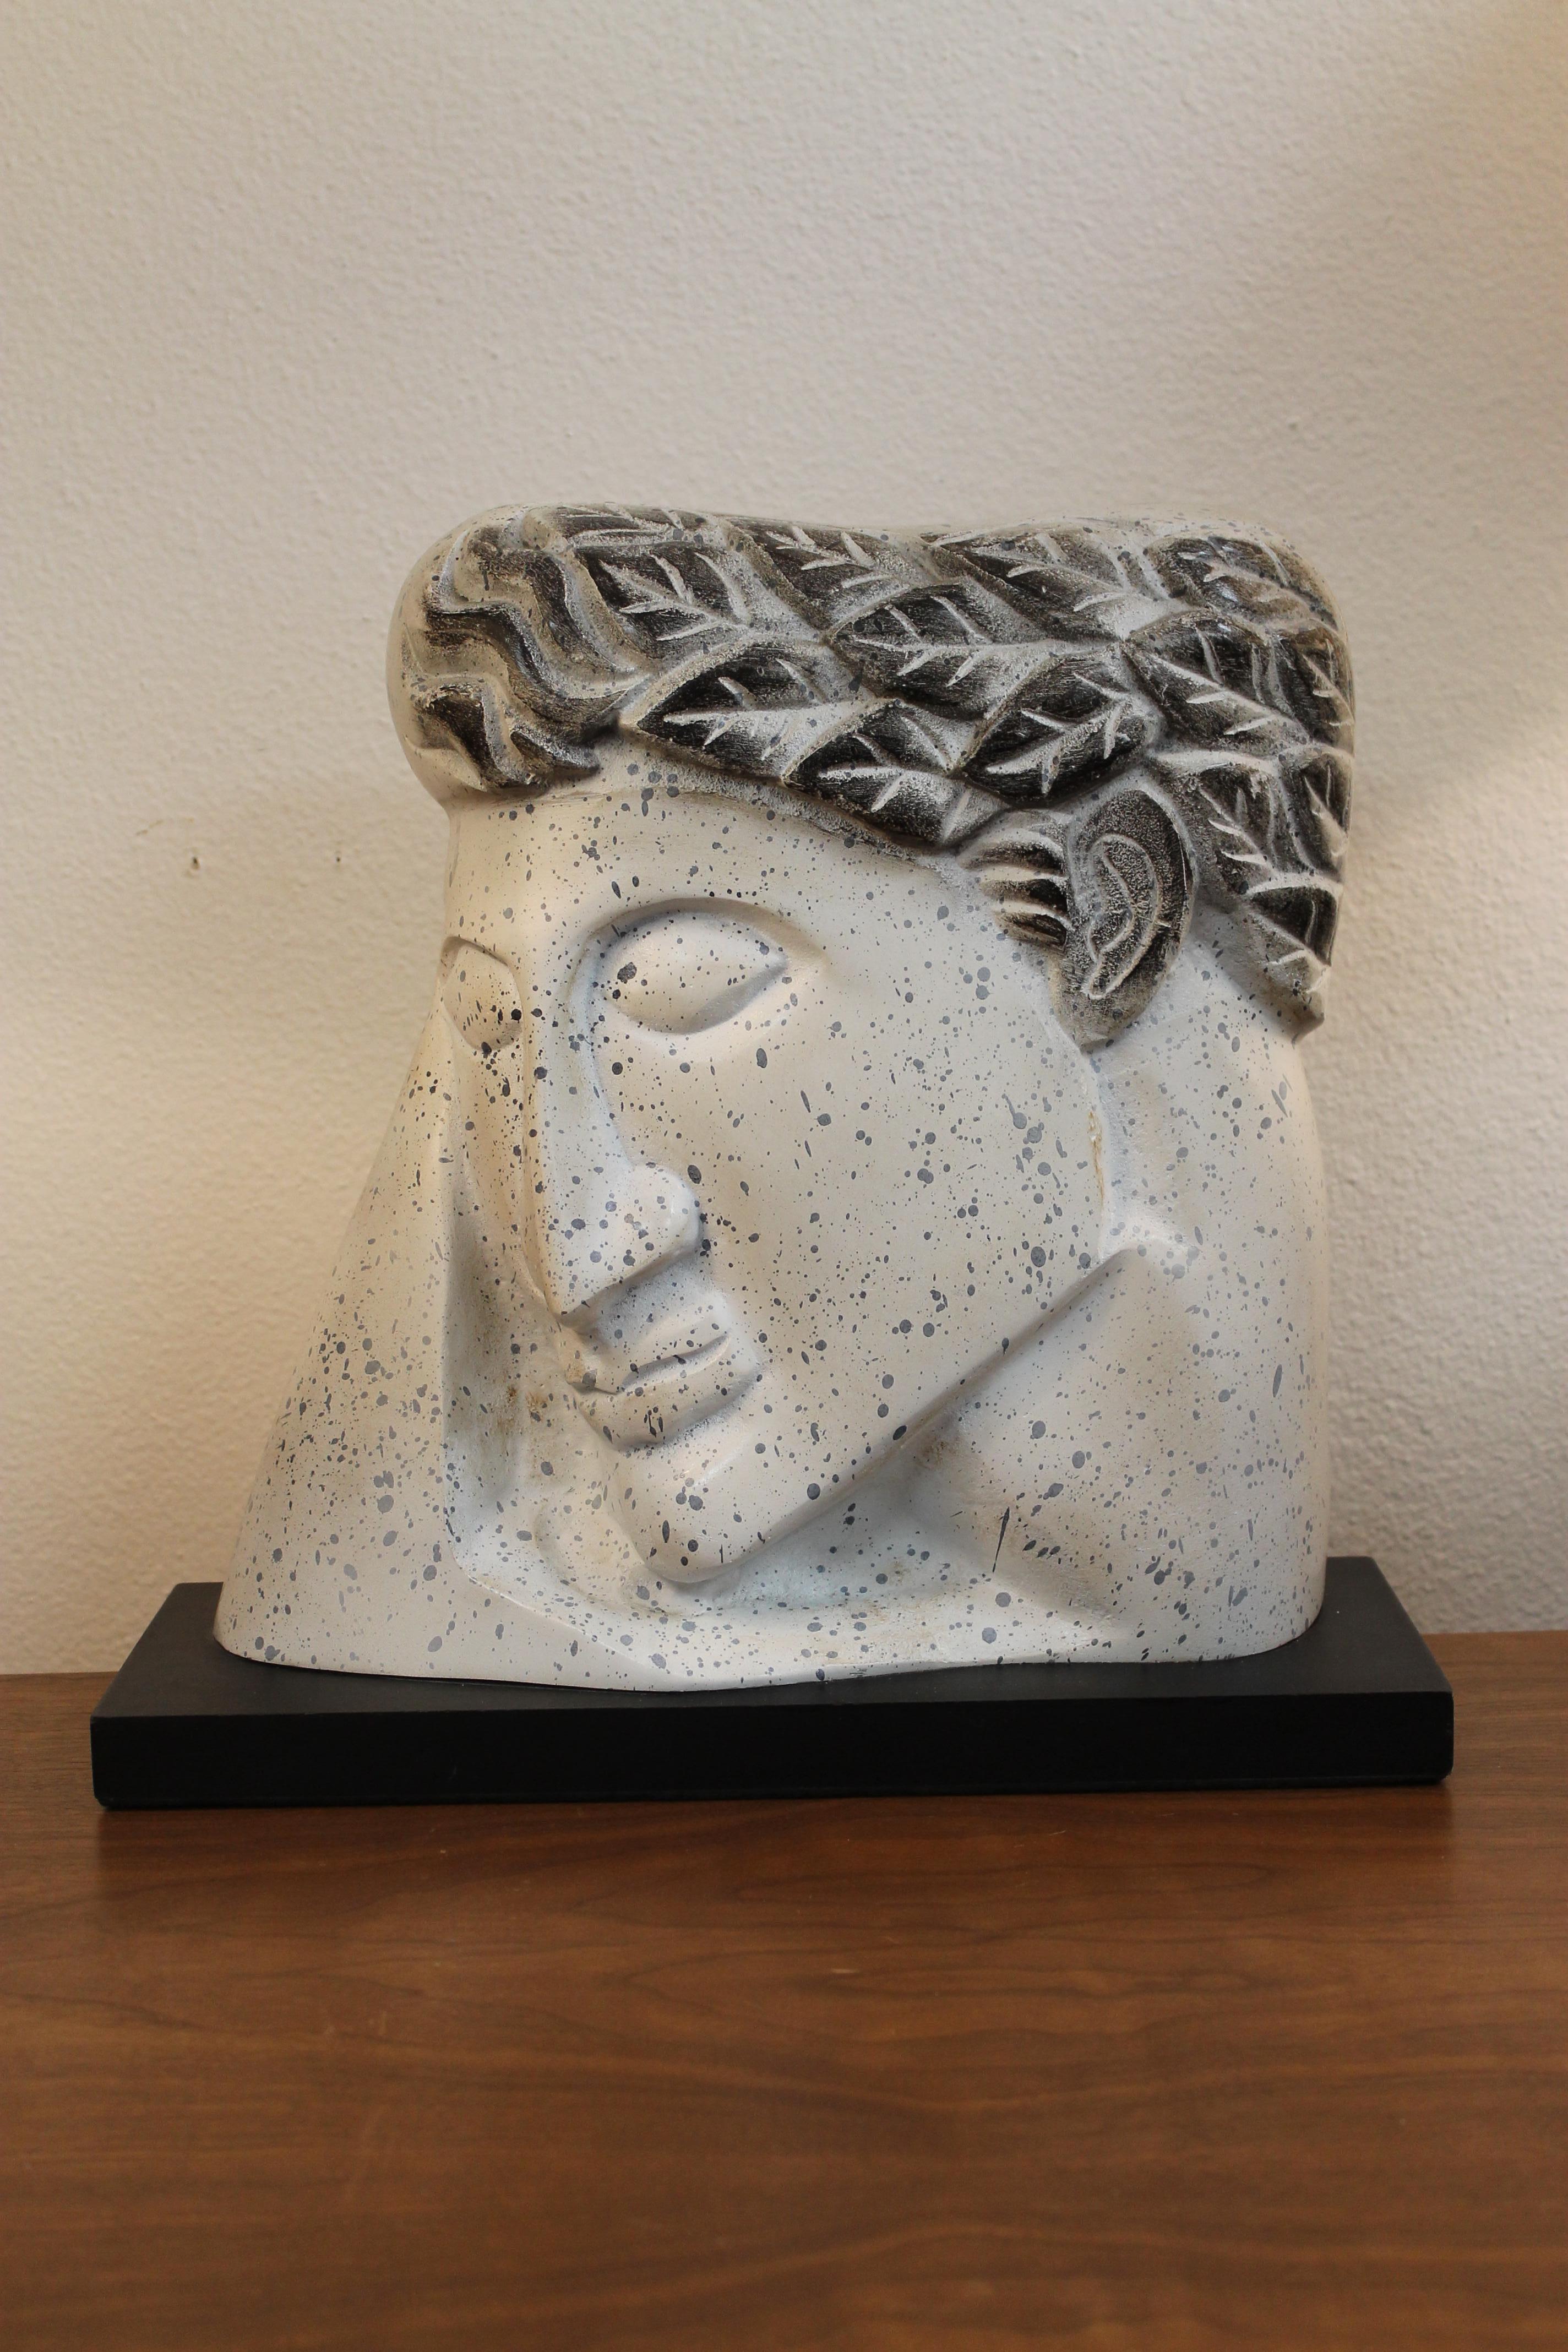 Stylized plaster head on wood stand. Piece isn't signed. Ceramic portion is 13